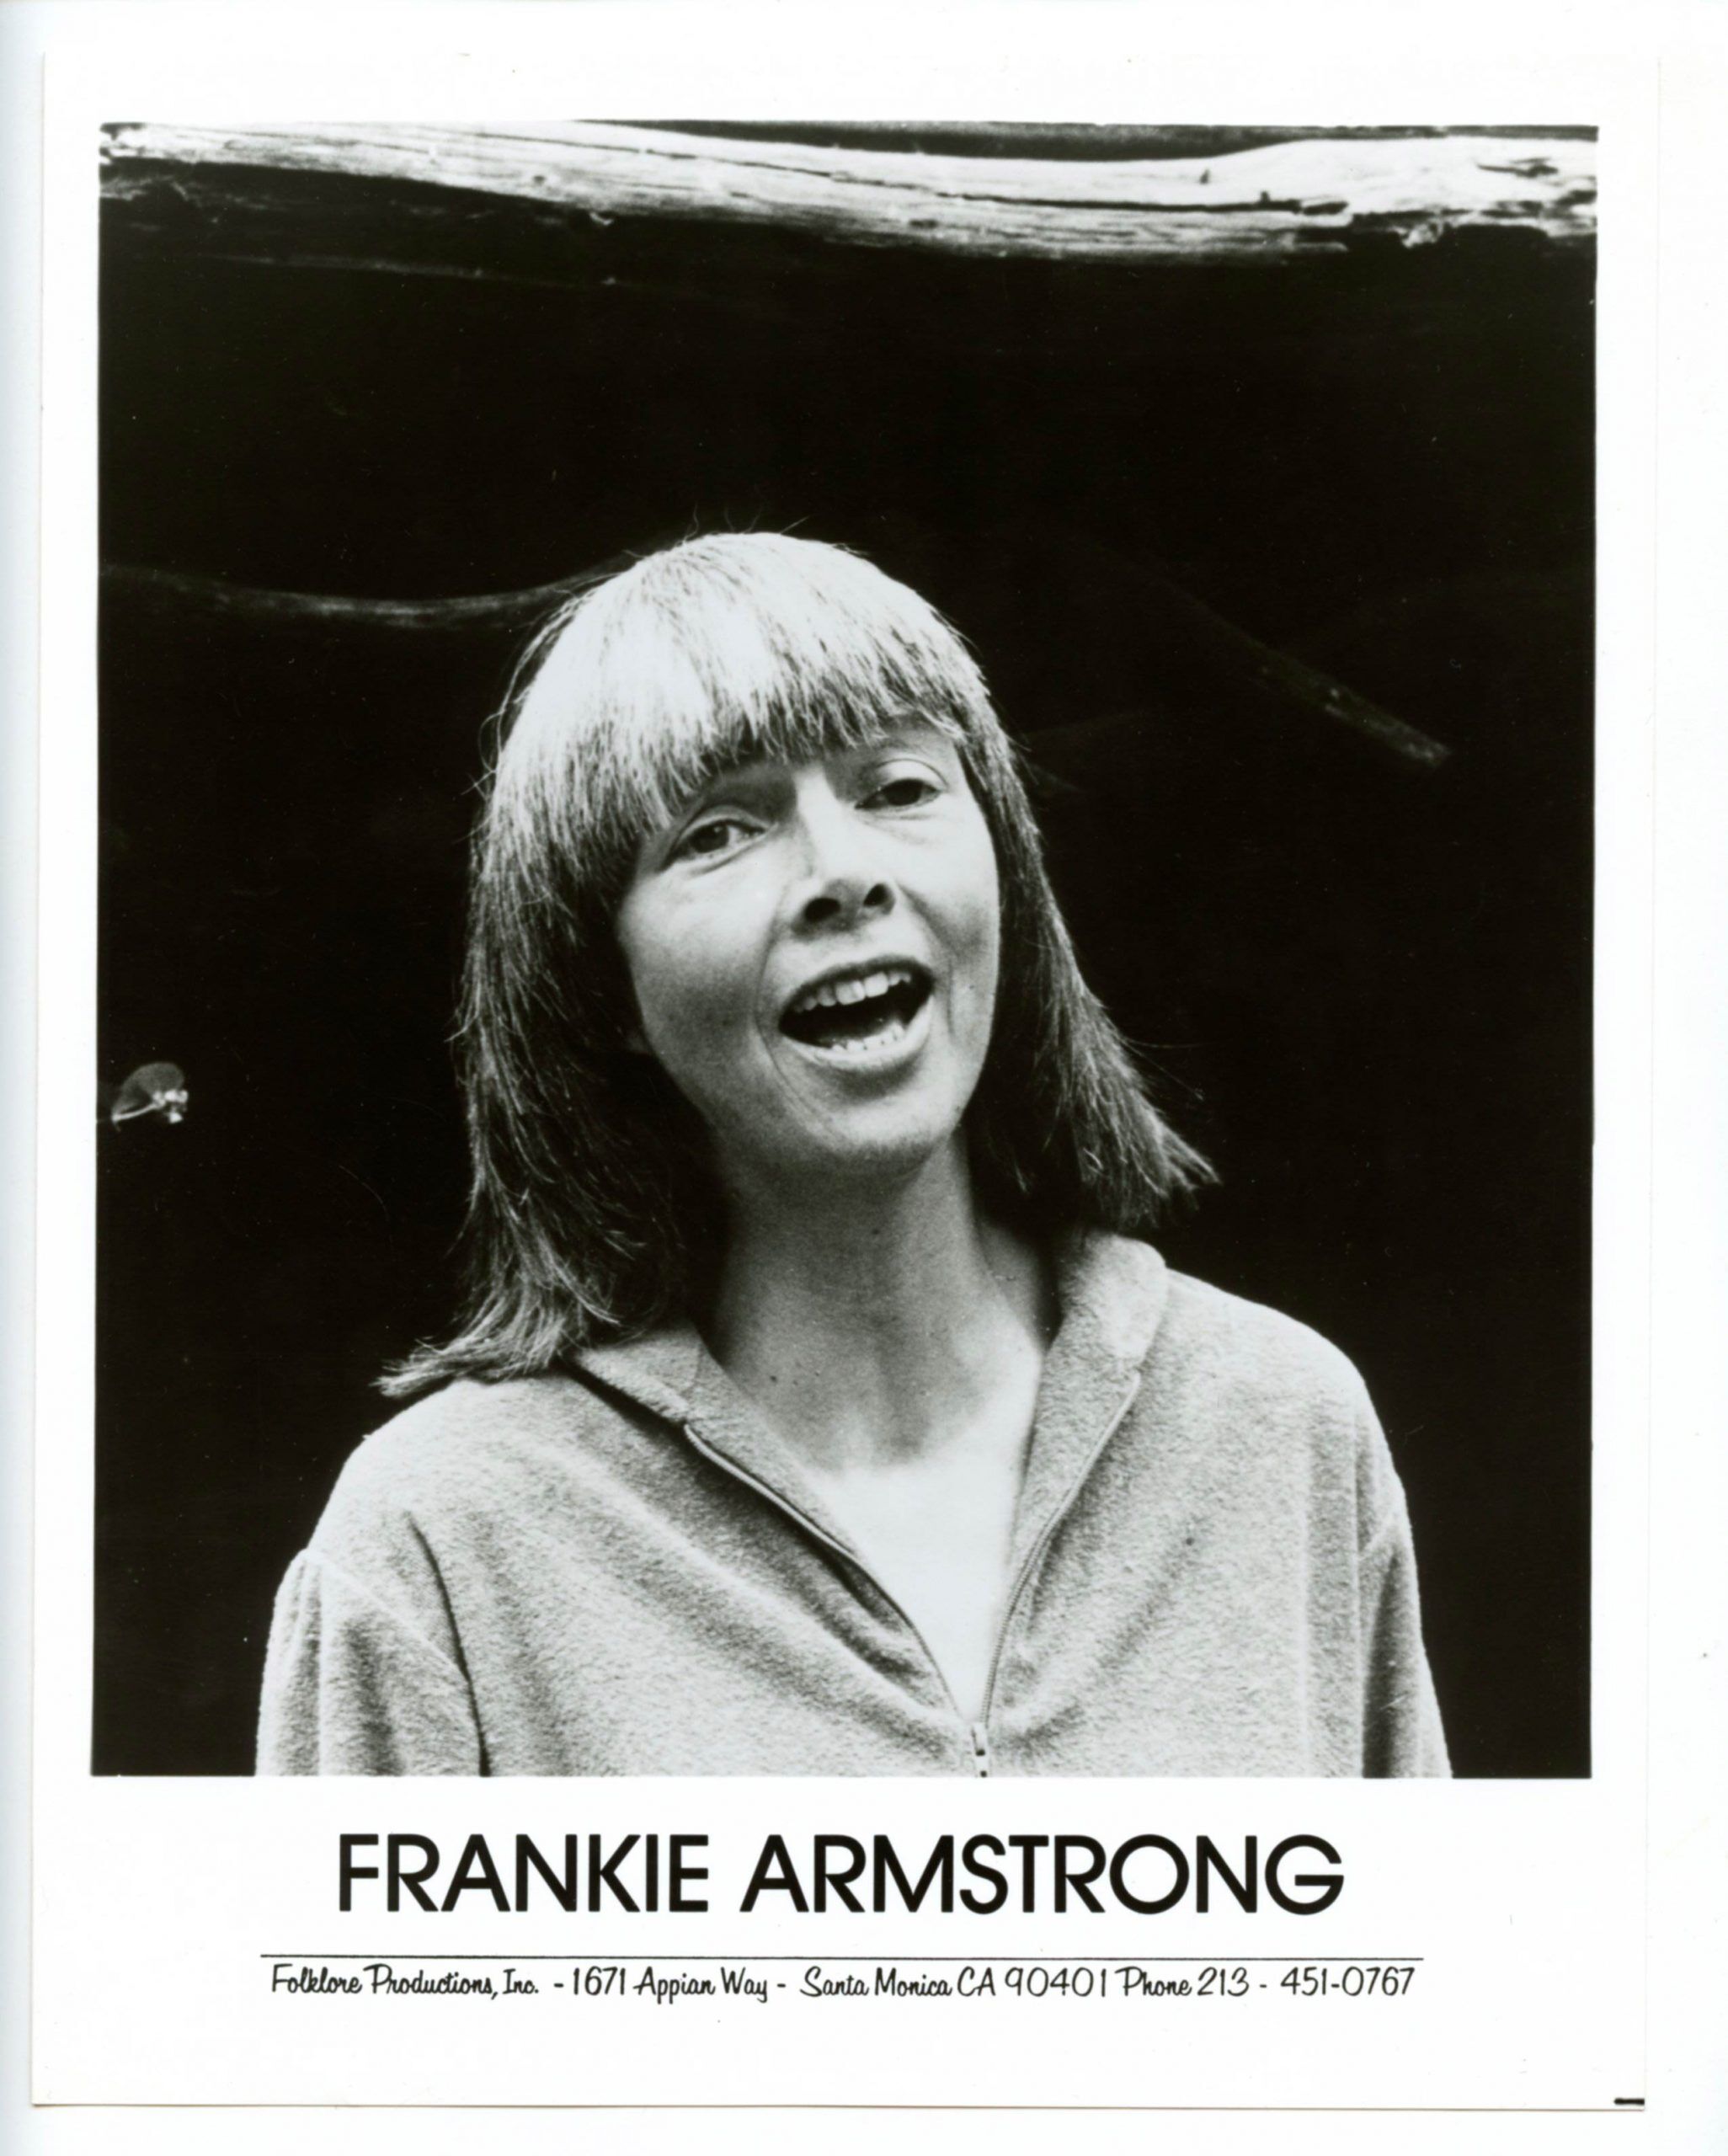 Frankie Armstrong Photo 1980s Publicity Promotion